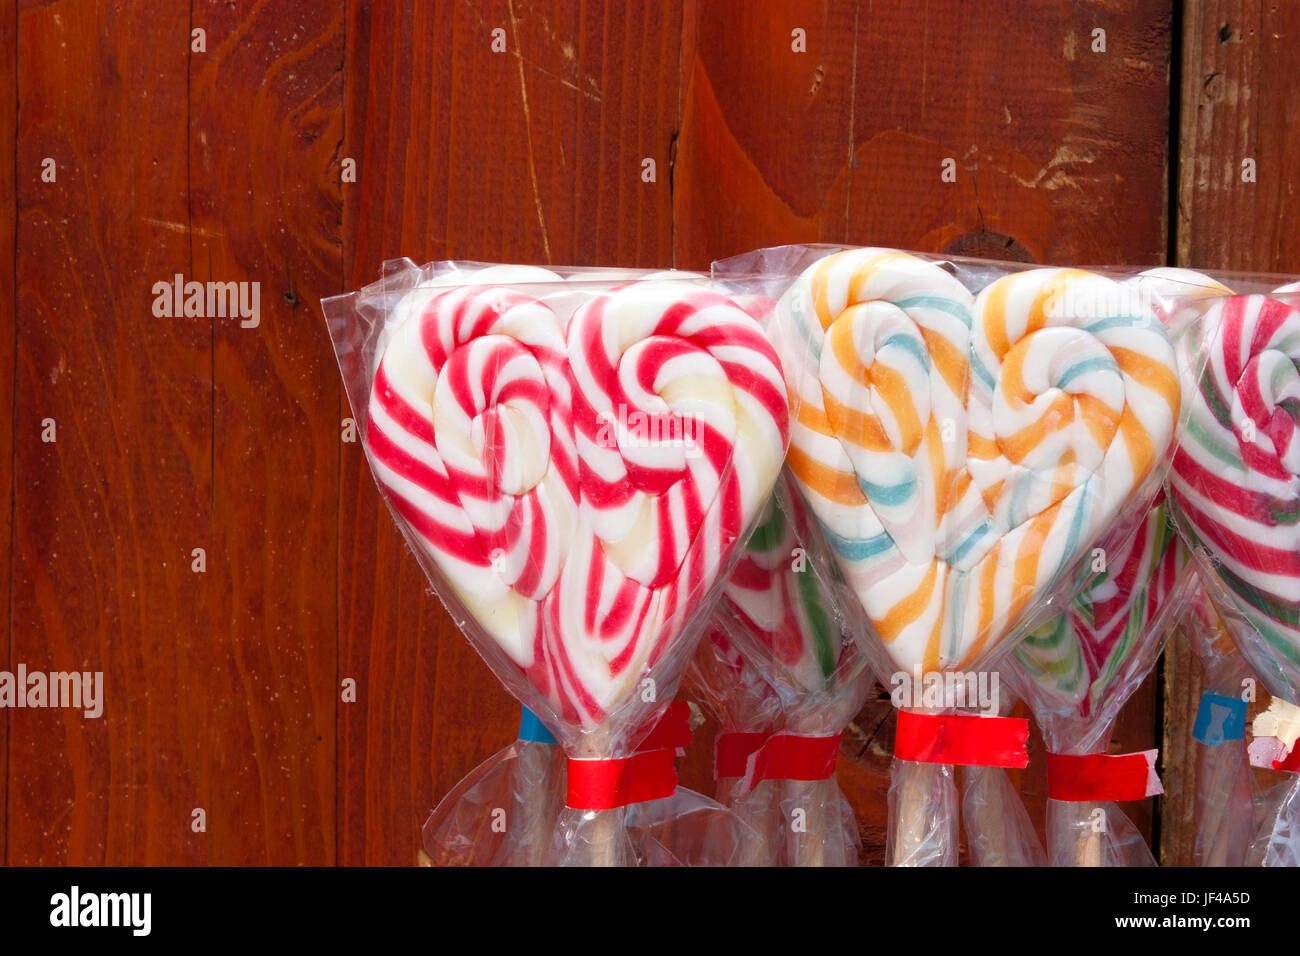 Colorful heart shaped lolly pops wrapped in cellophane, detaill Stock Photo